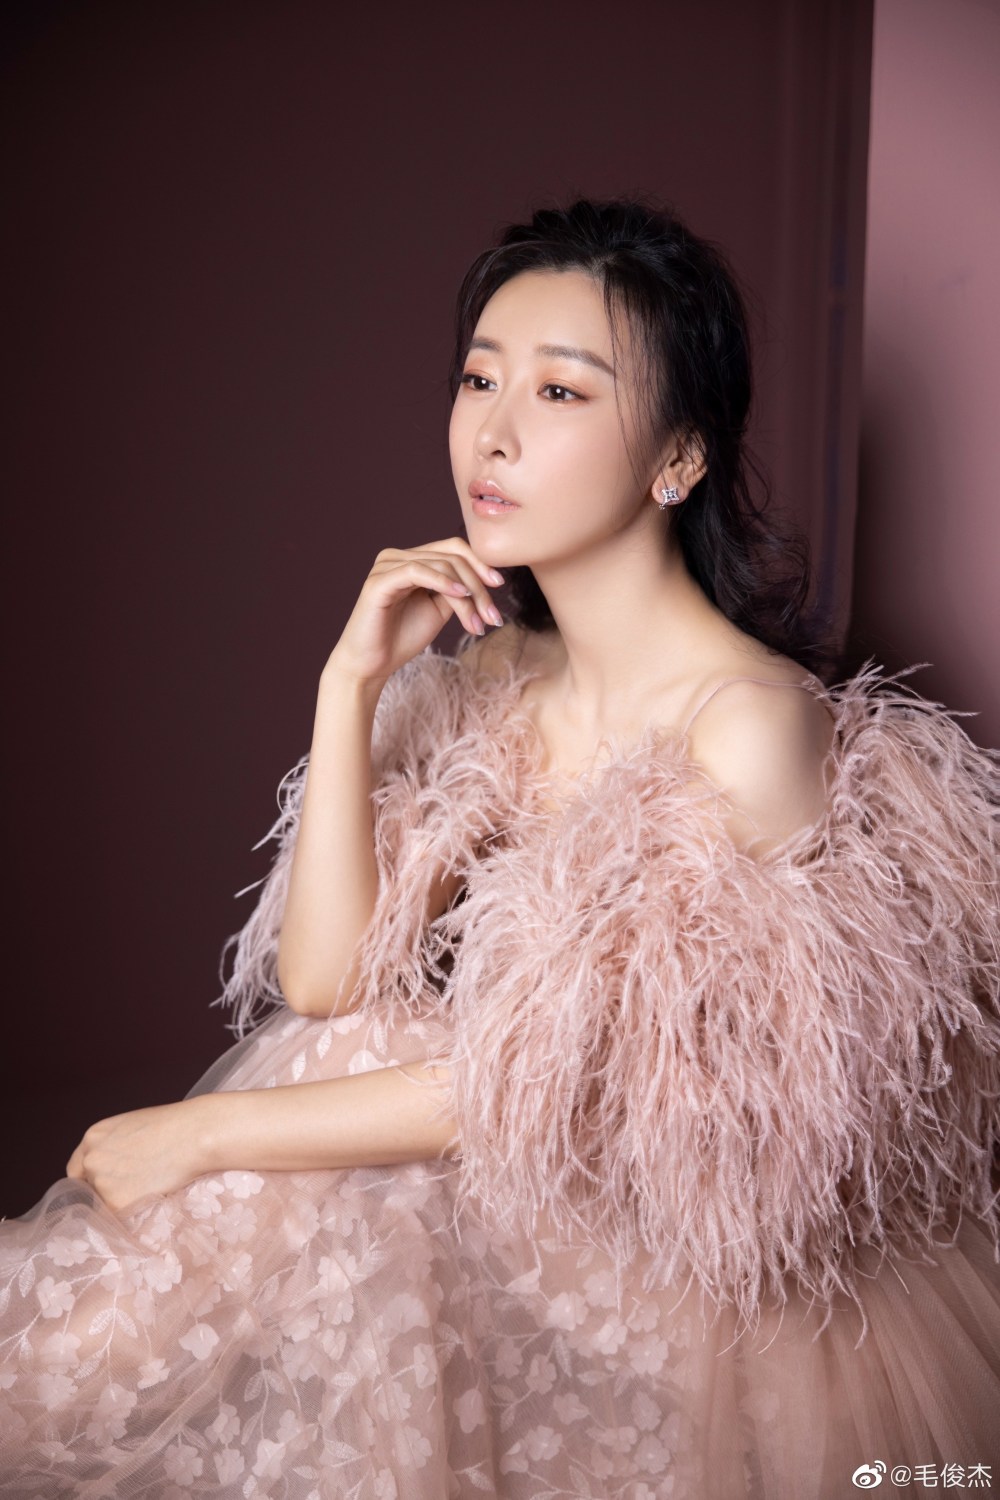 Junjie Mao Sexy and Hottest Photos , Latest Pics